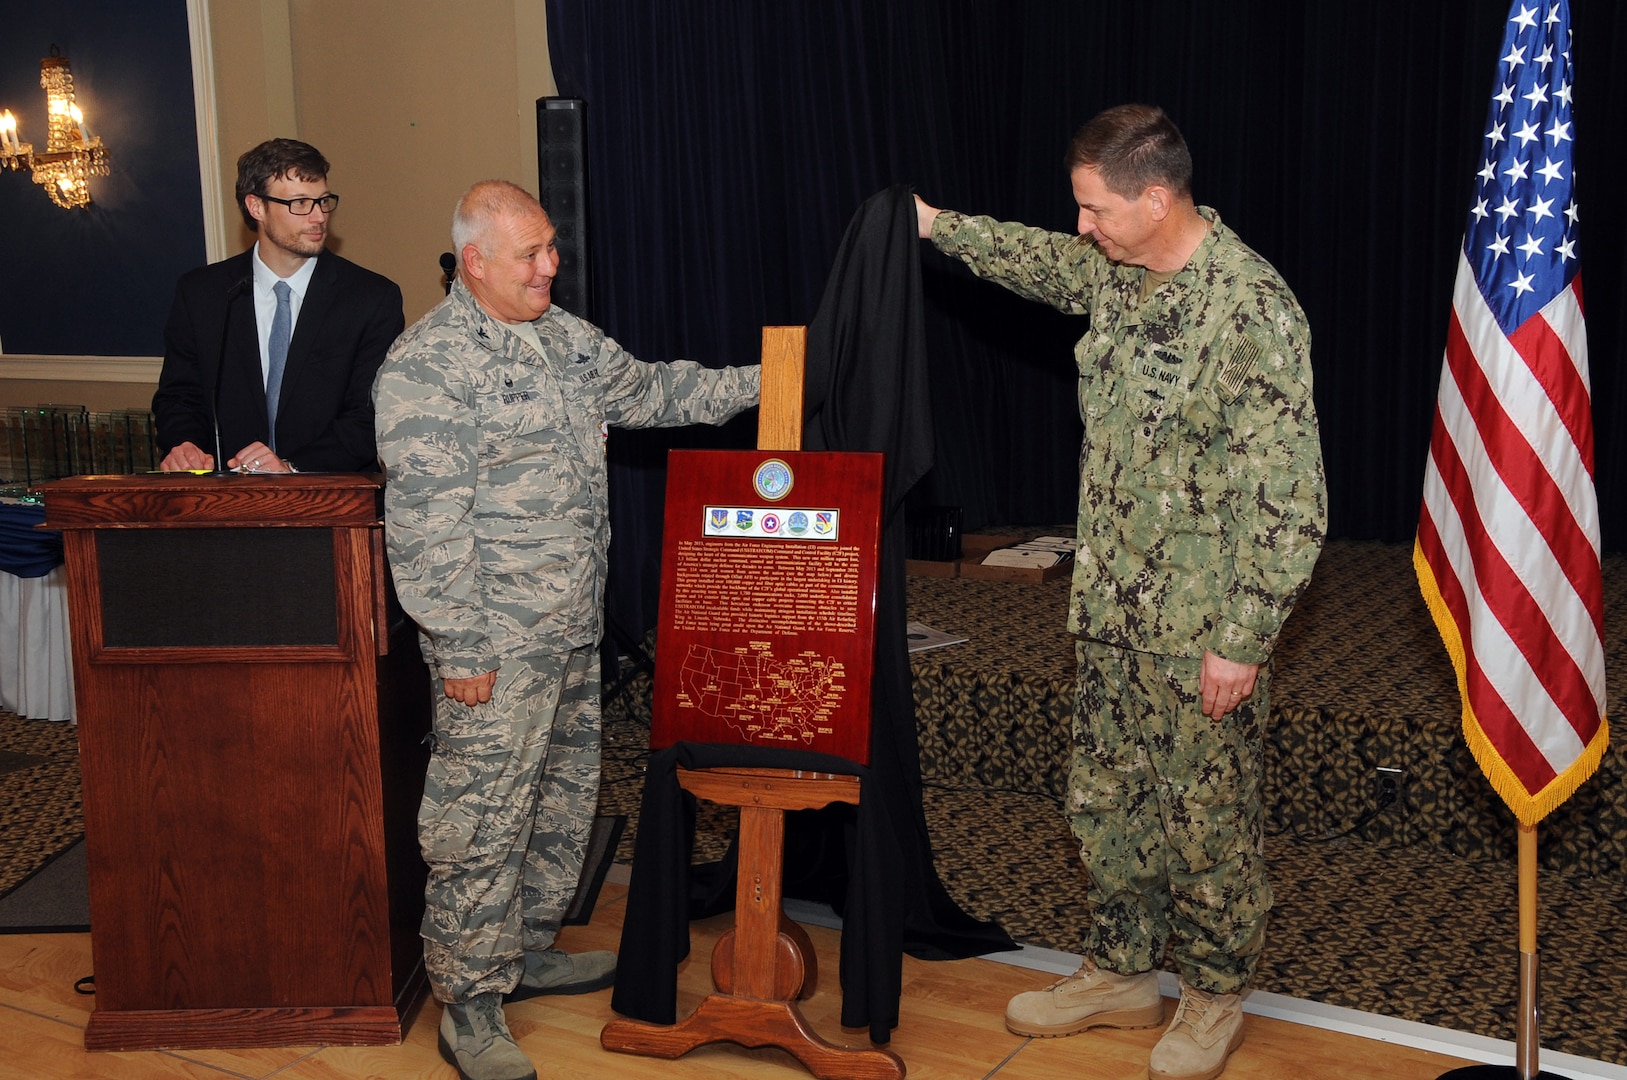 U.S. Navy Vice Admiral David M. Kriete, deputy commander of the U.S. Strategic Command (USSTRATCOM), and U.S. Air Force Col. Wade Rupper, commander of the 251st Cyberspace Engineering Installation Group (251st CEIG), present a plaque during a luncheon and ceremony at the Patriot Club on Offutt Air Force Base, Neb., Aug. 6, 2018. The 251st CEIG, the 220th Engineering Installation Squadron, and the total force, United States Air Force engineering installation community were recognized for providing the infrastructure and cable installation for the new USSTRATCOM Command and Control facility over the past five years.